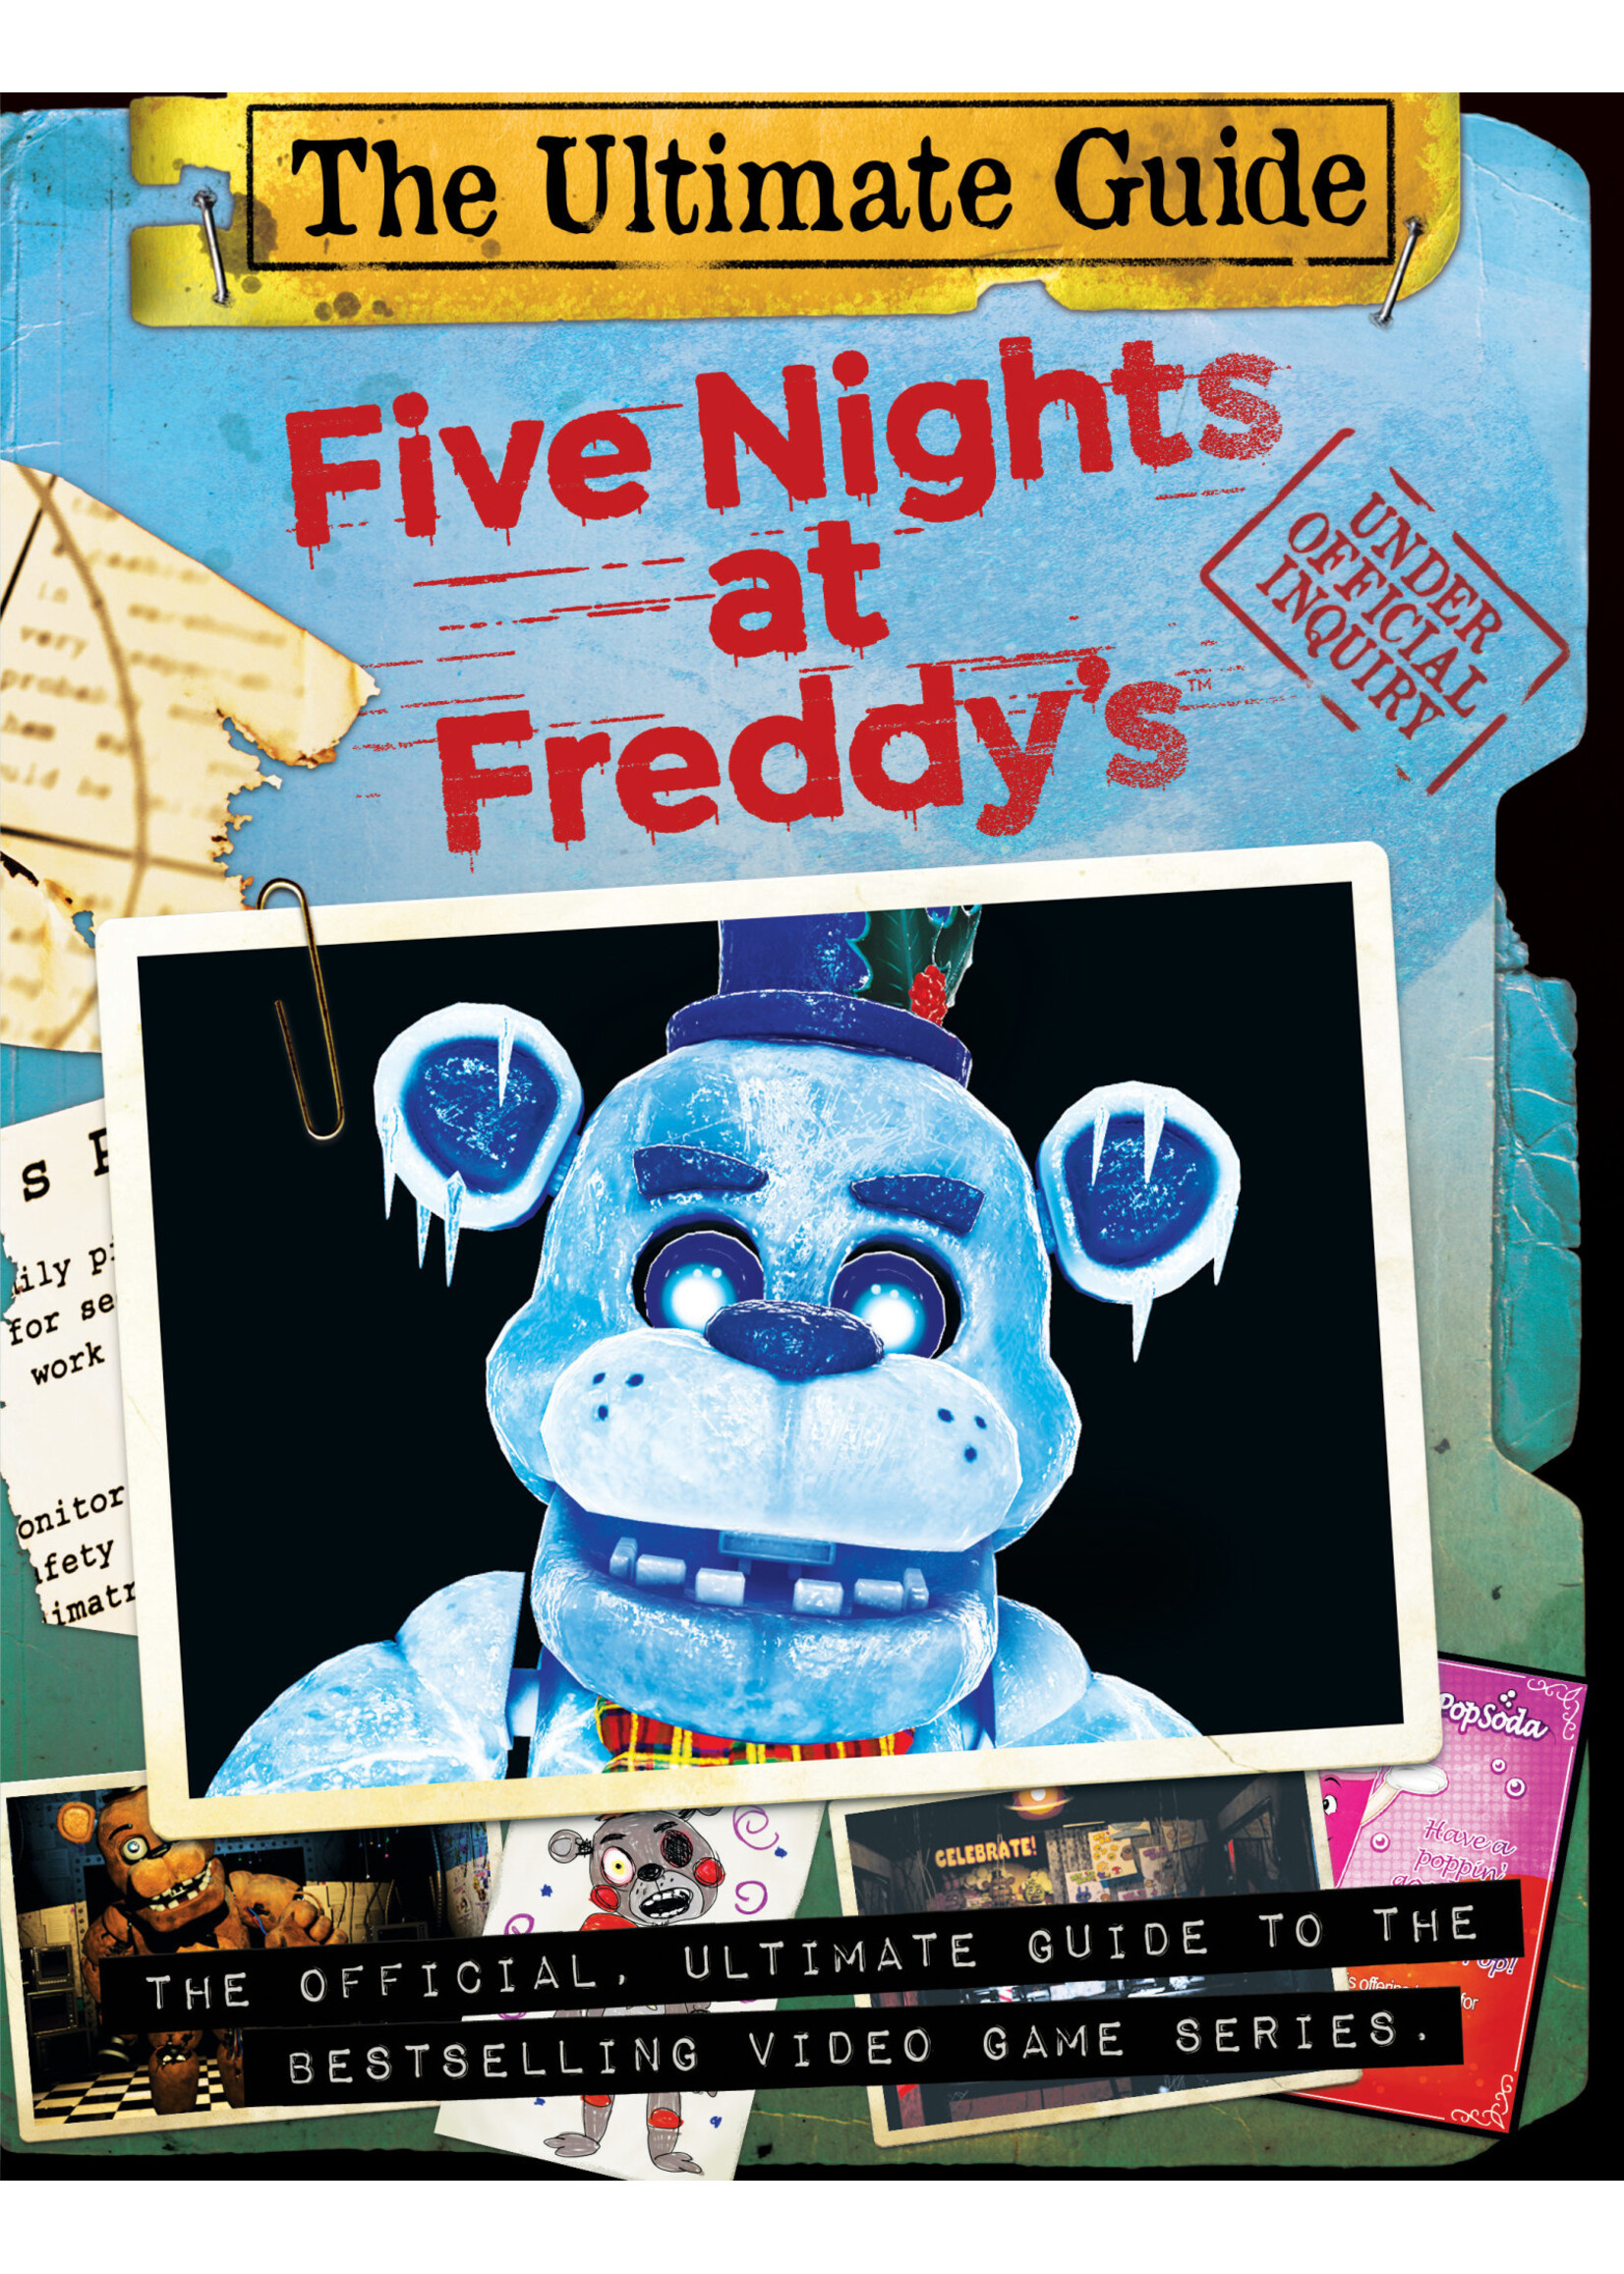 Five Nights at Freddy's: The Ultimate Guide by Scott Cawthon